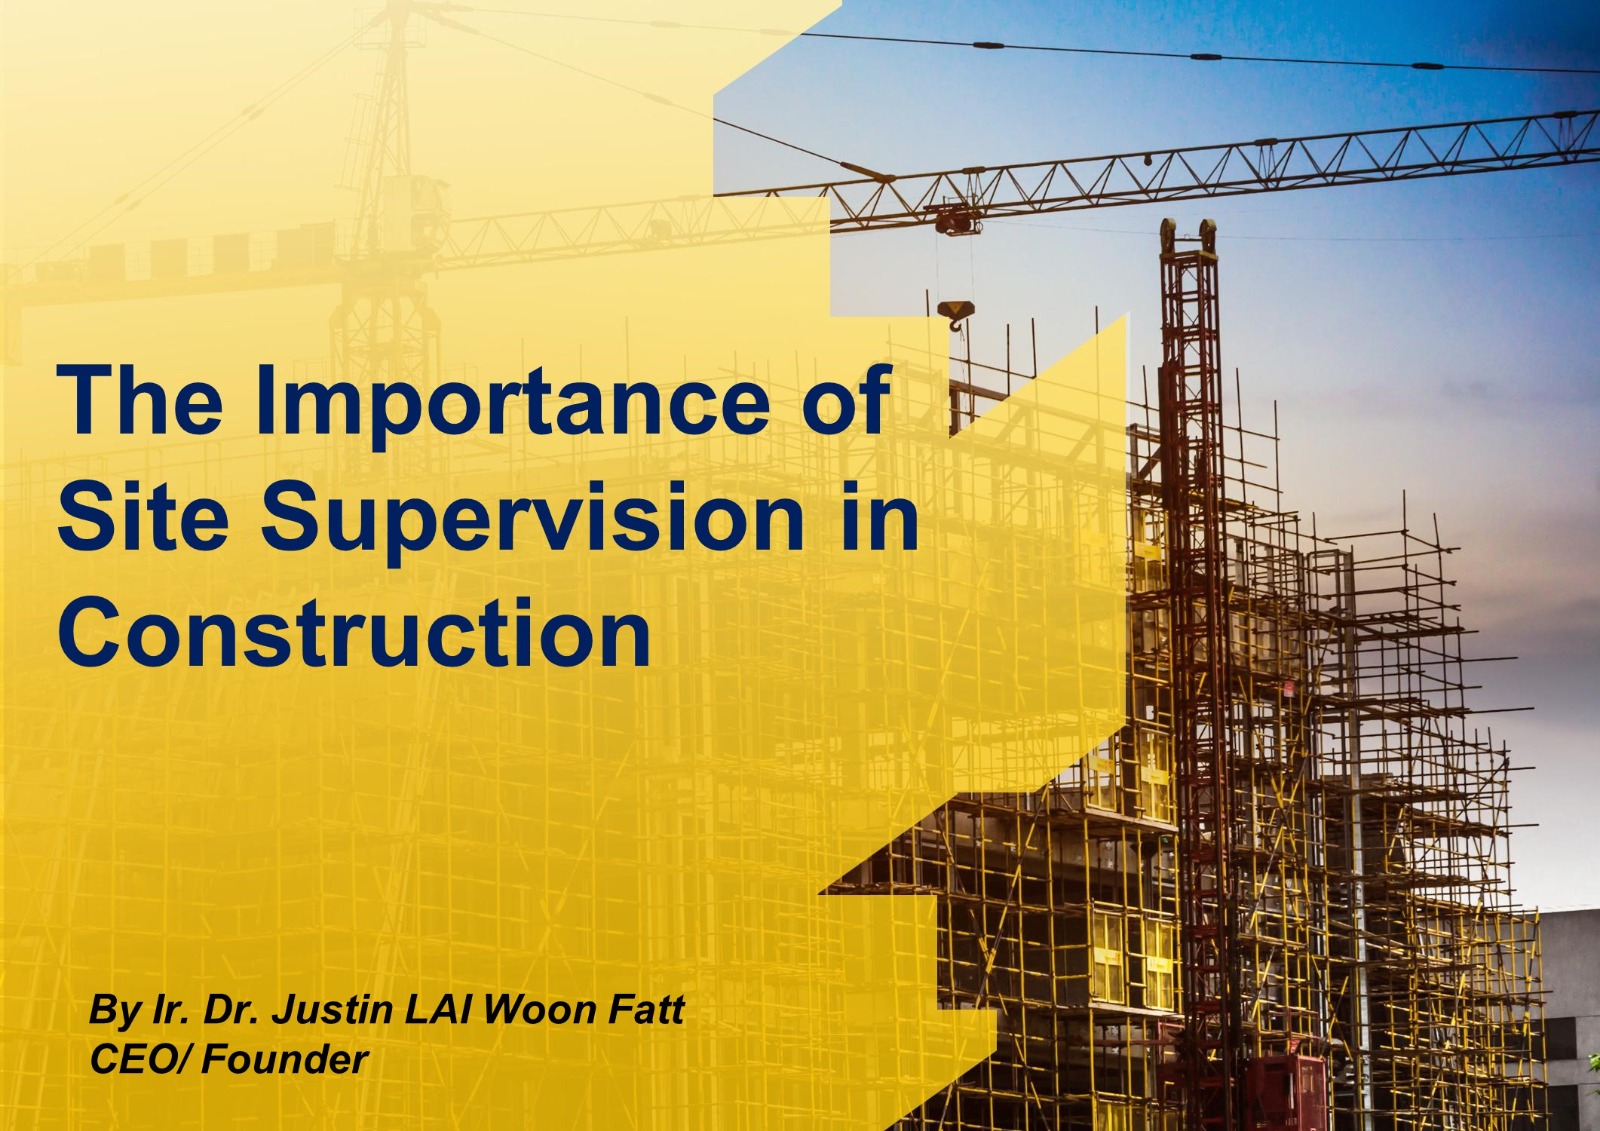 The Importance of Site Supervision in Construction